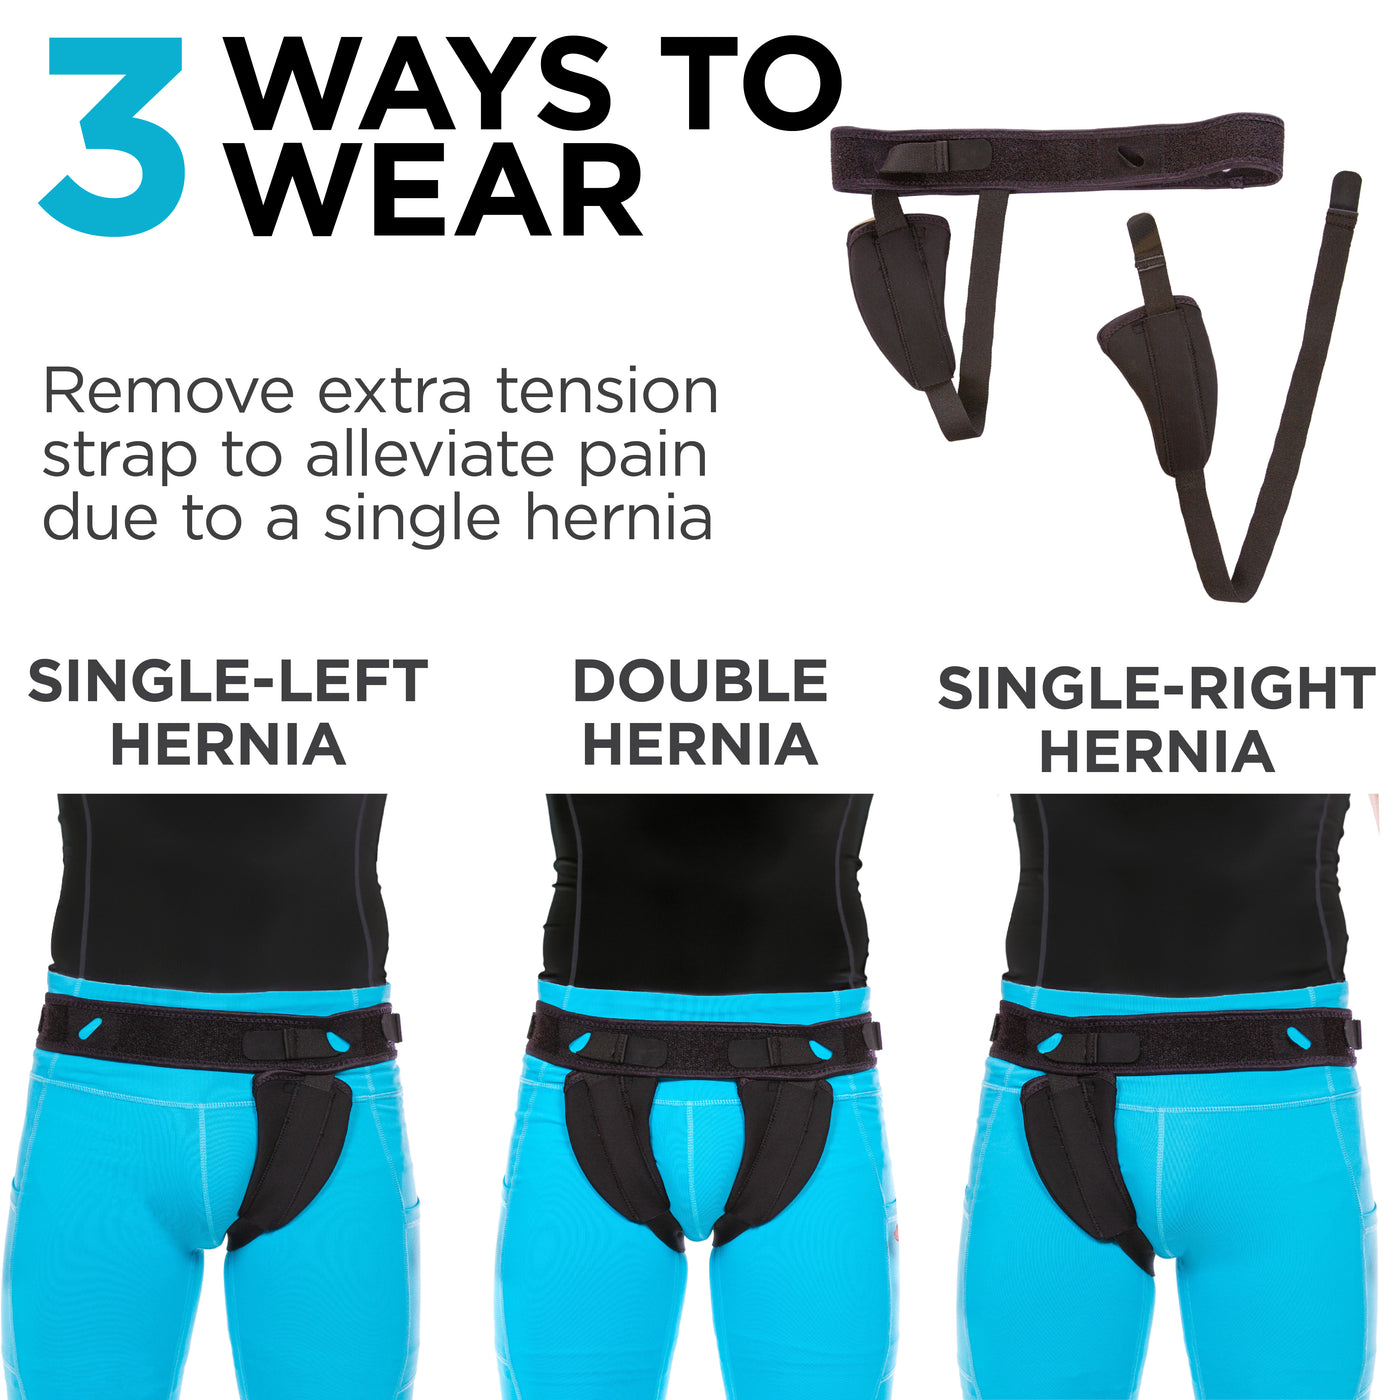 the bilateral inguinal hernia belt can be worn with one or two compression pads for single or double hernias